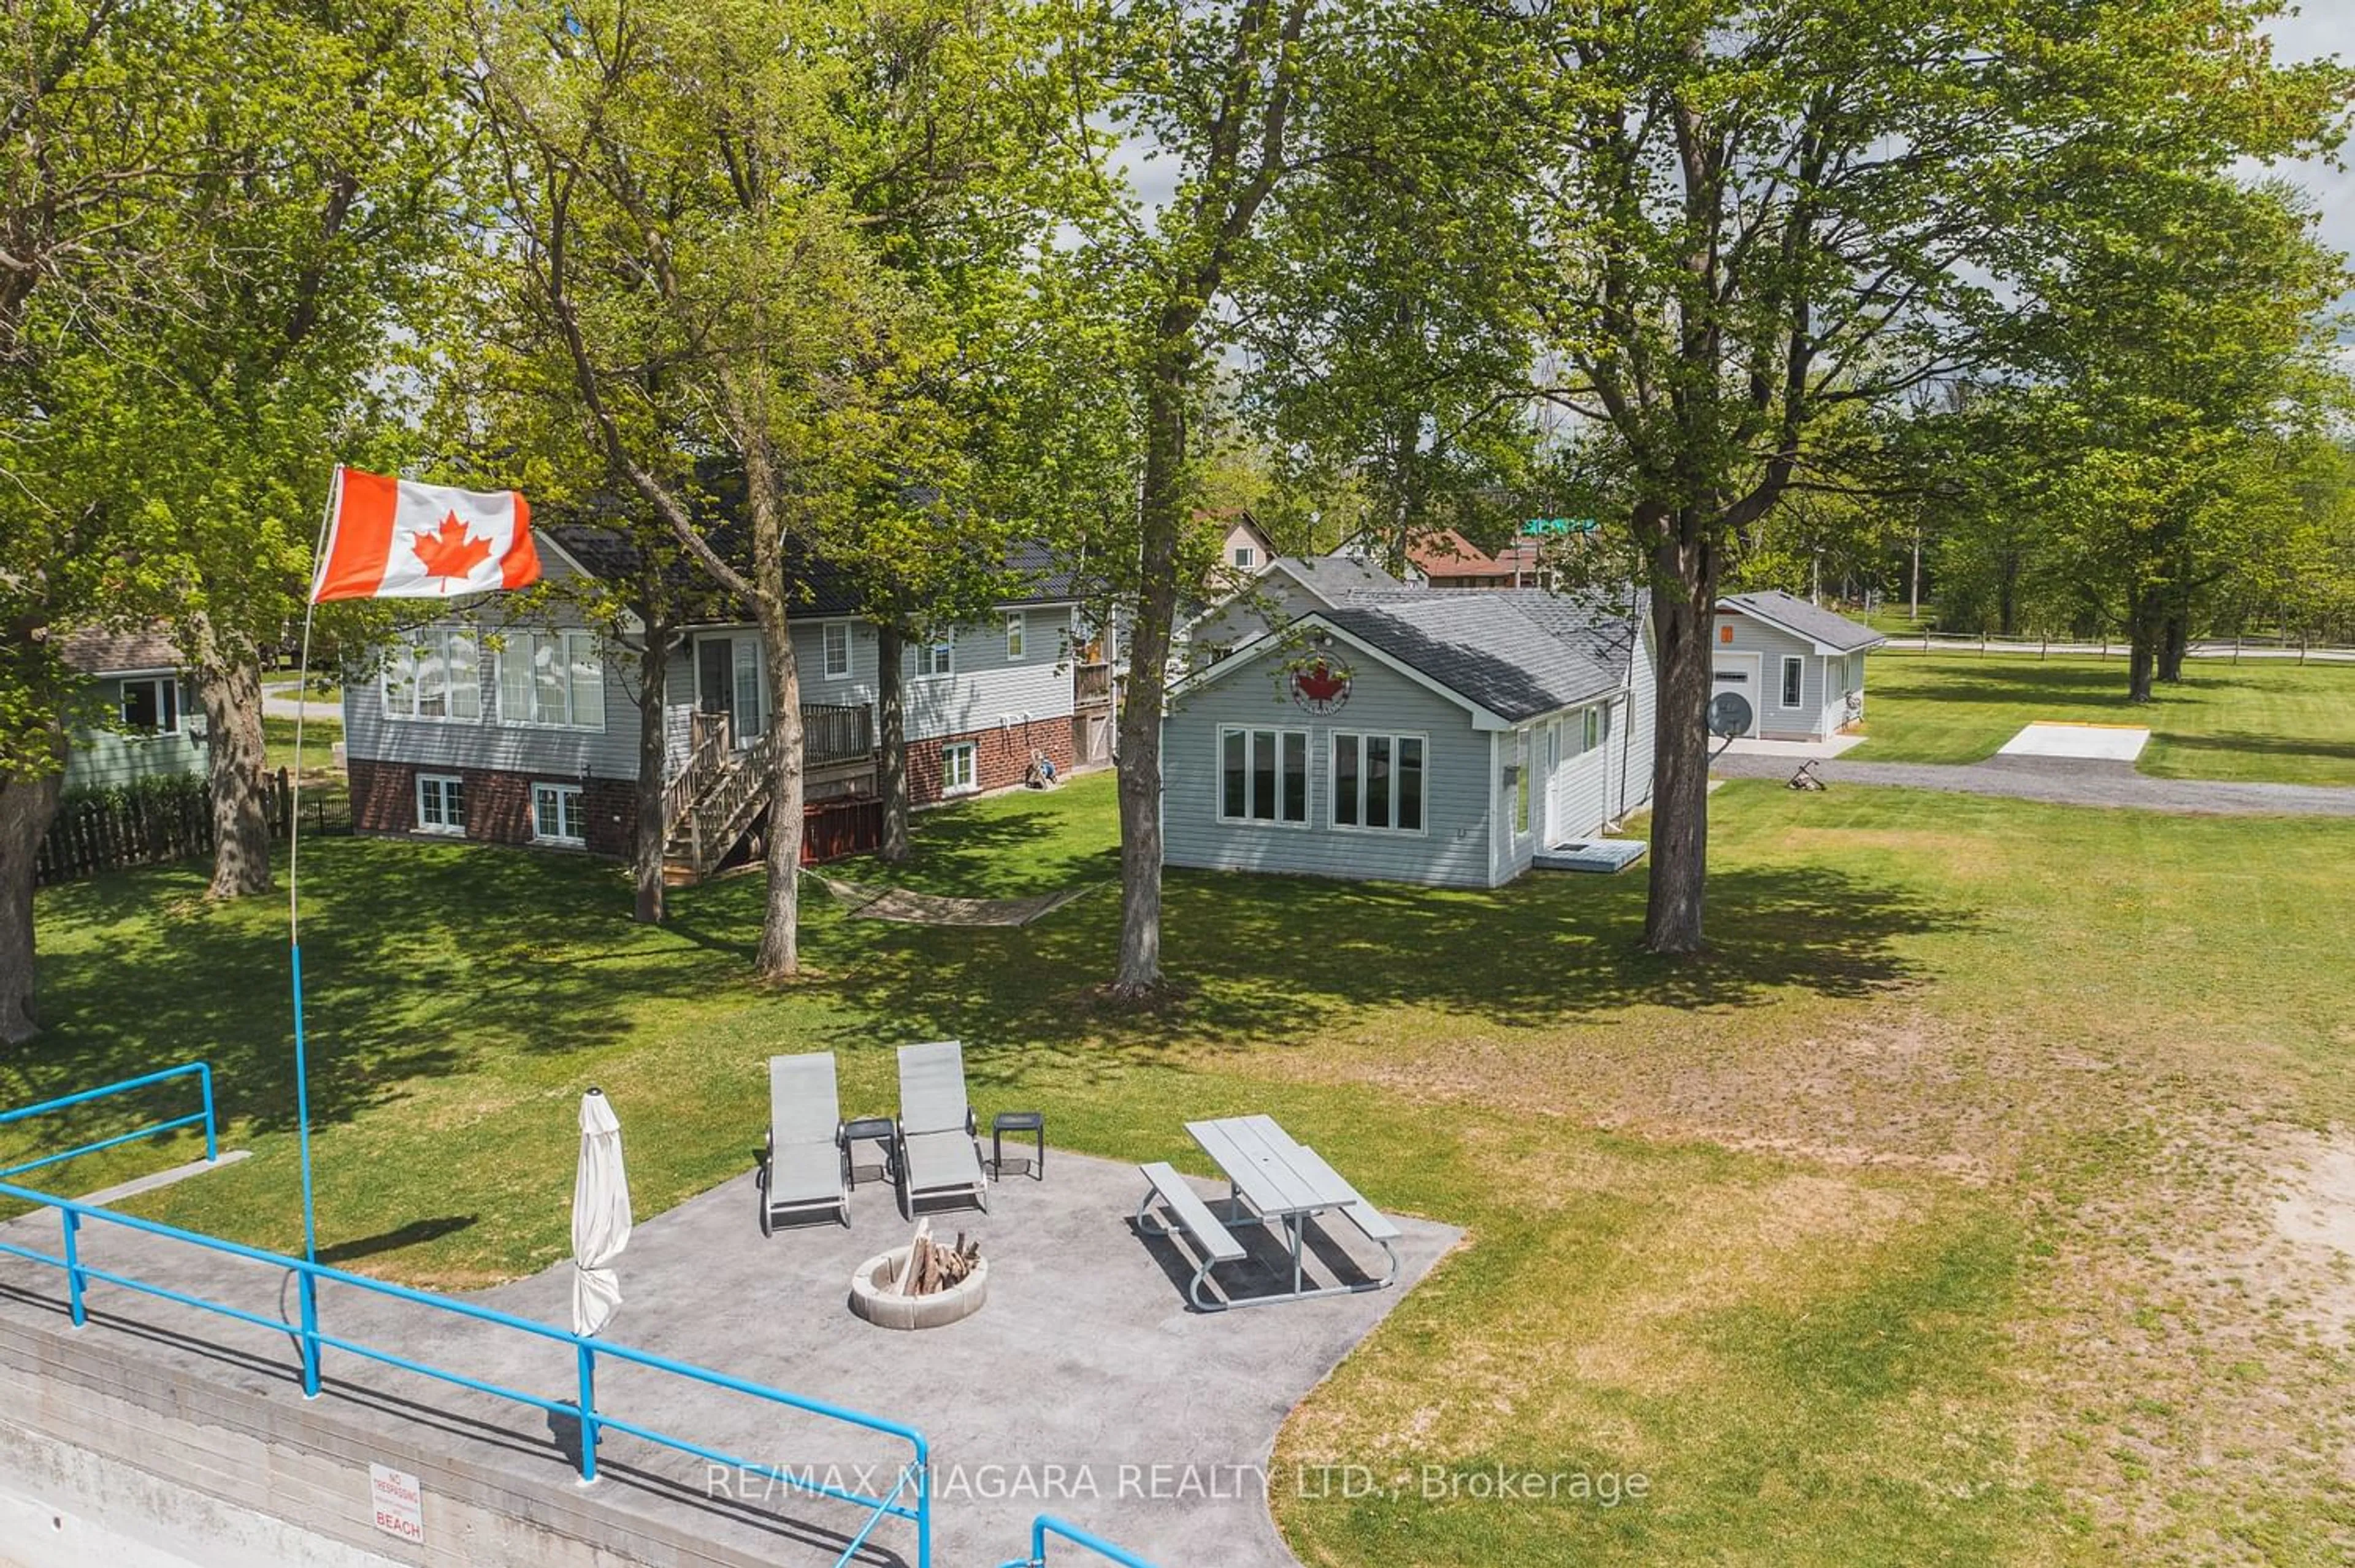 Cottage for 12281 Lakeshore Rd, Wainfleet Ontario L0S 1V0